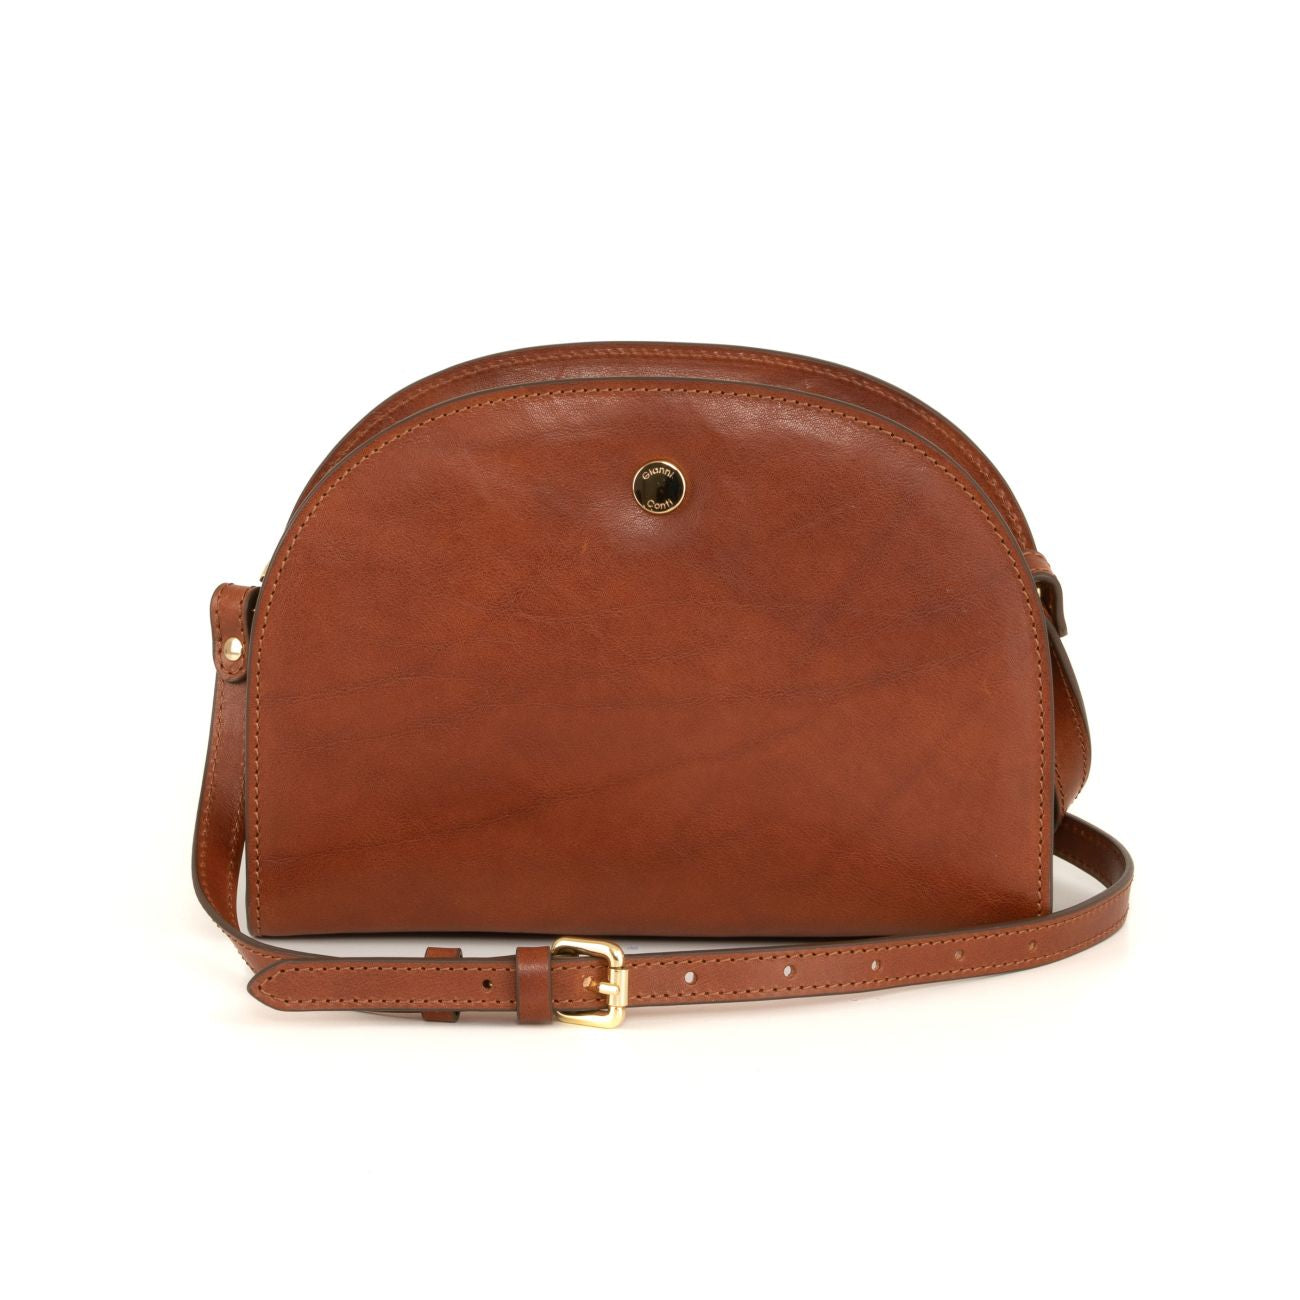 Ronnie Cognac Leather Shoulder Bag by Gianni Conti